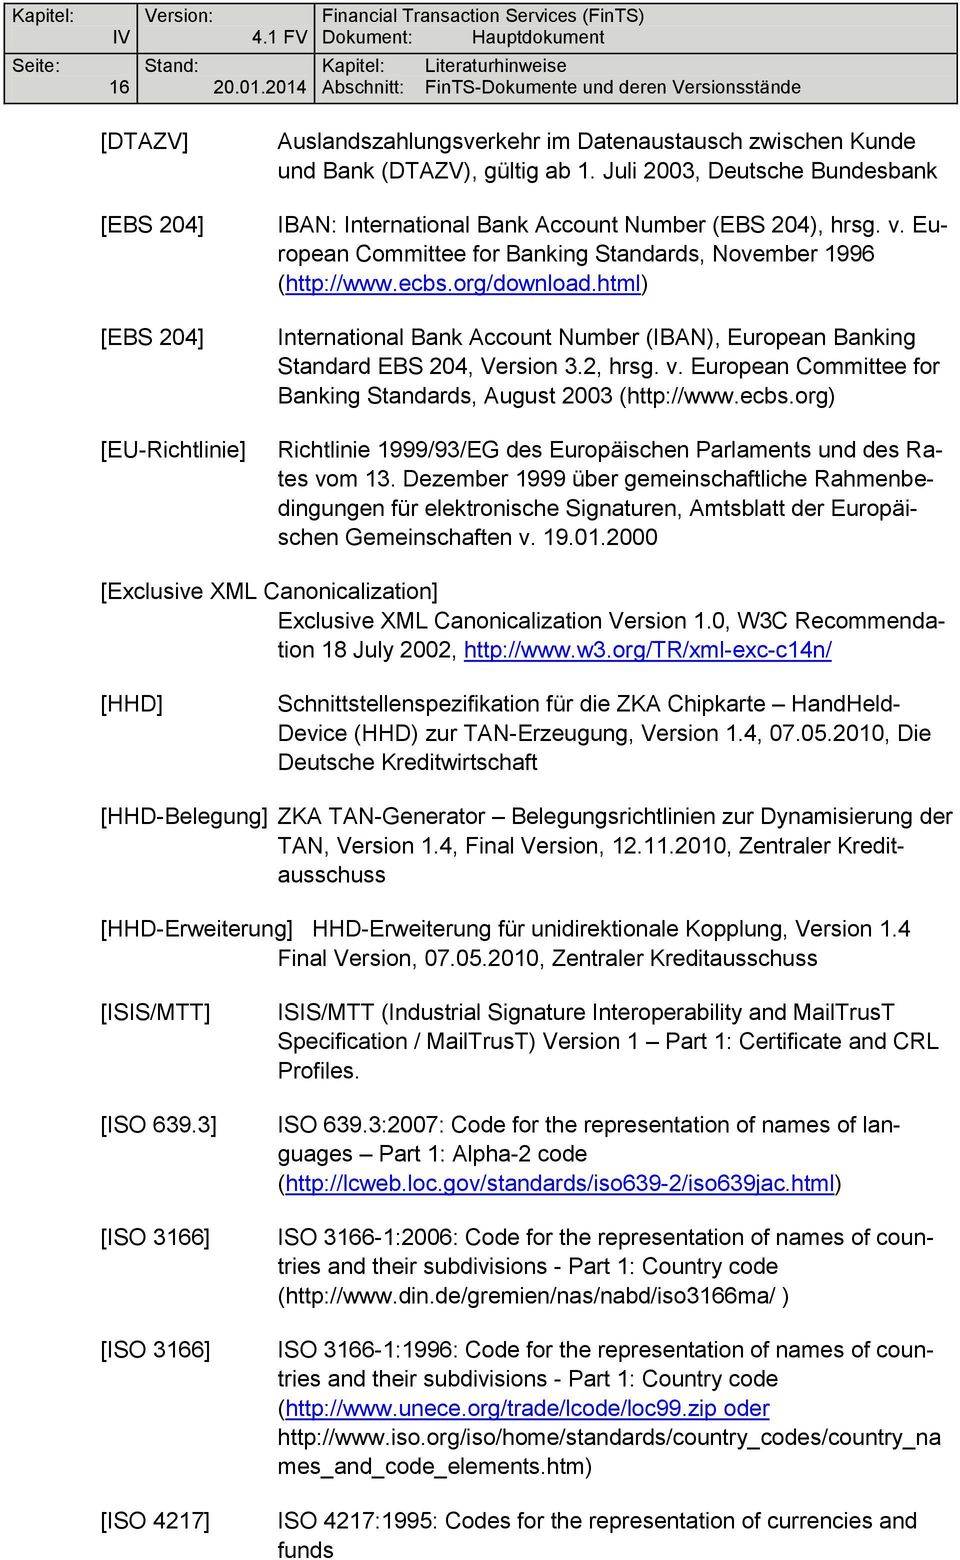 html) International Bank Account Number (IBAN), European Banking Standard EBS 204, Version 3.2, hrsg. v. European Committee for Banking Standards, August 2003 (http://www.ecbs.